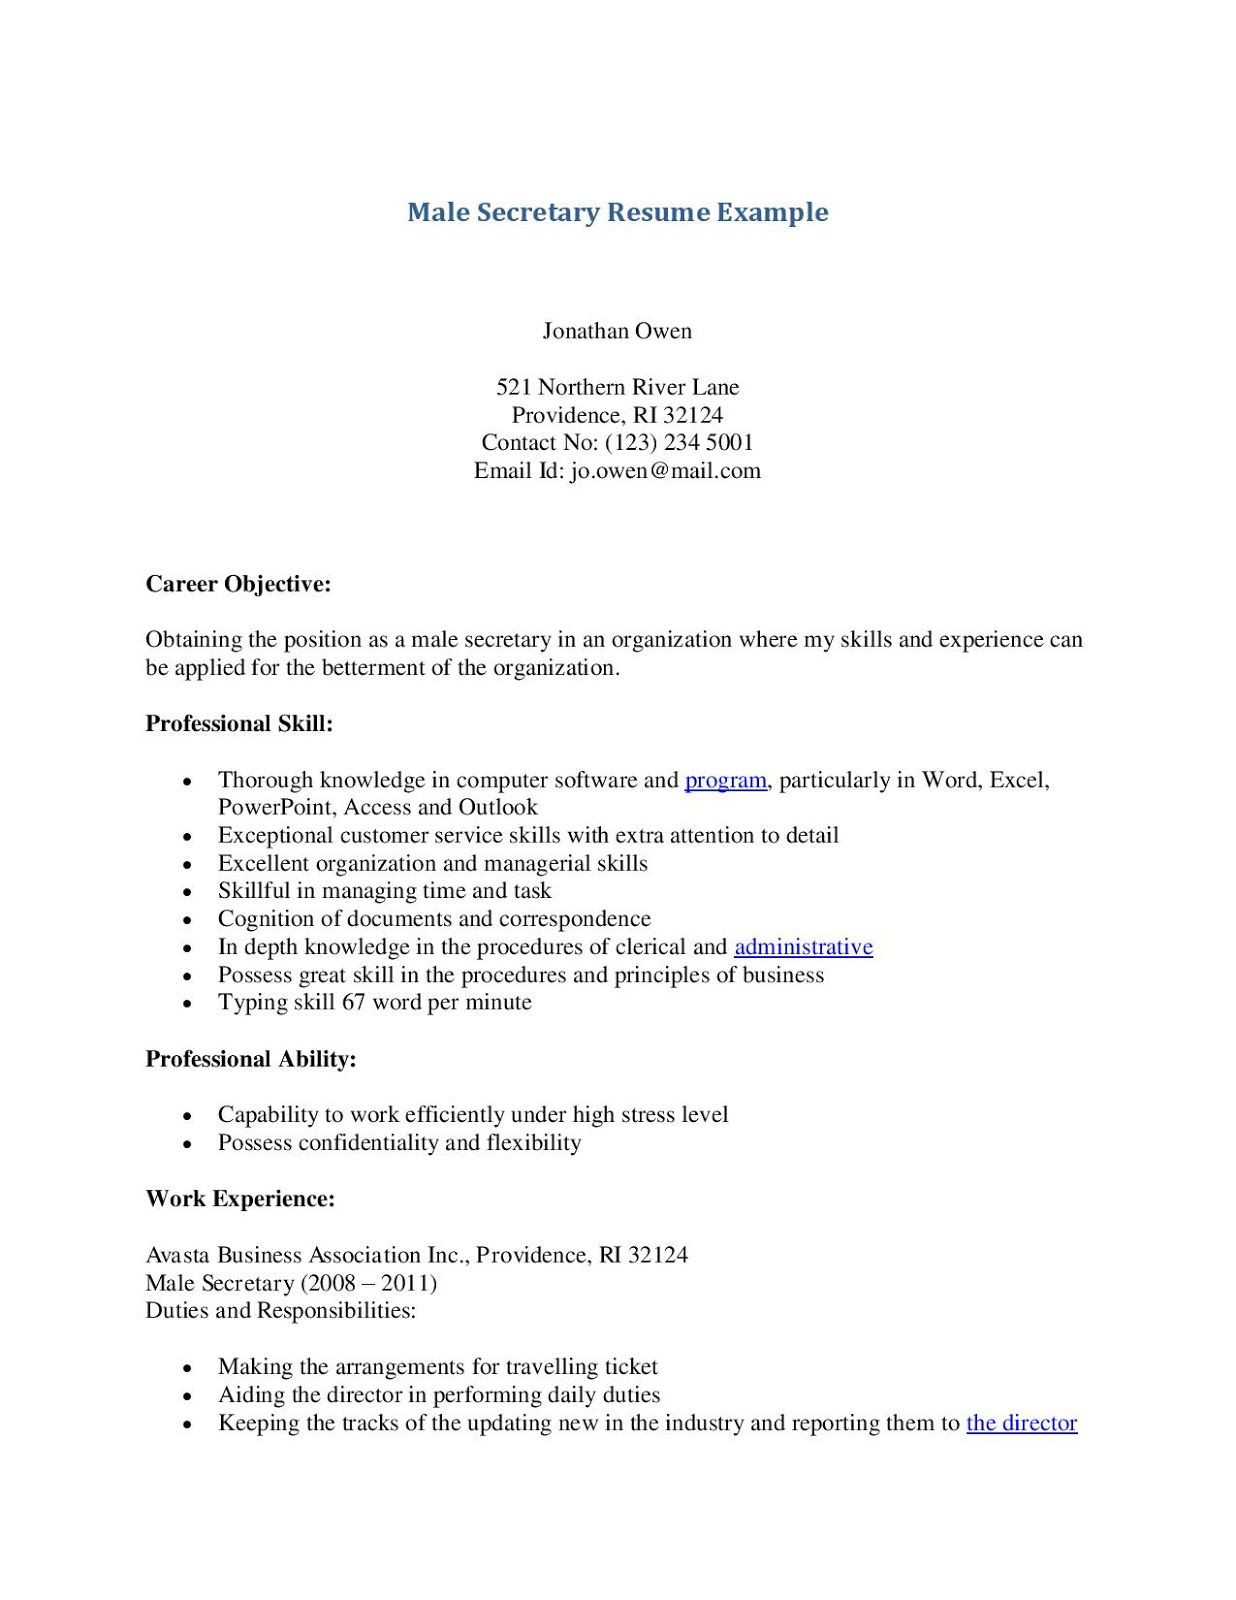 Sample Resume for Secretary with No Experience Secretary Resume Examples, Secretary Resume Examples 2019 …